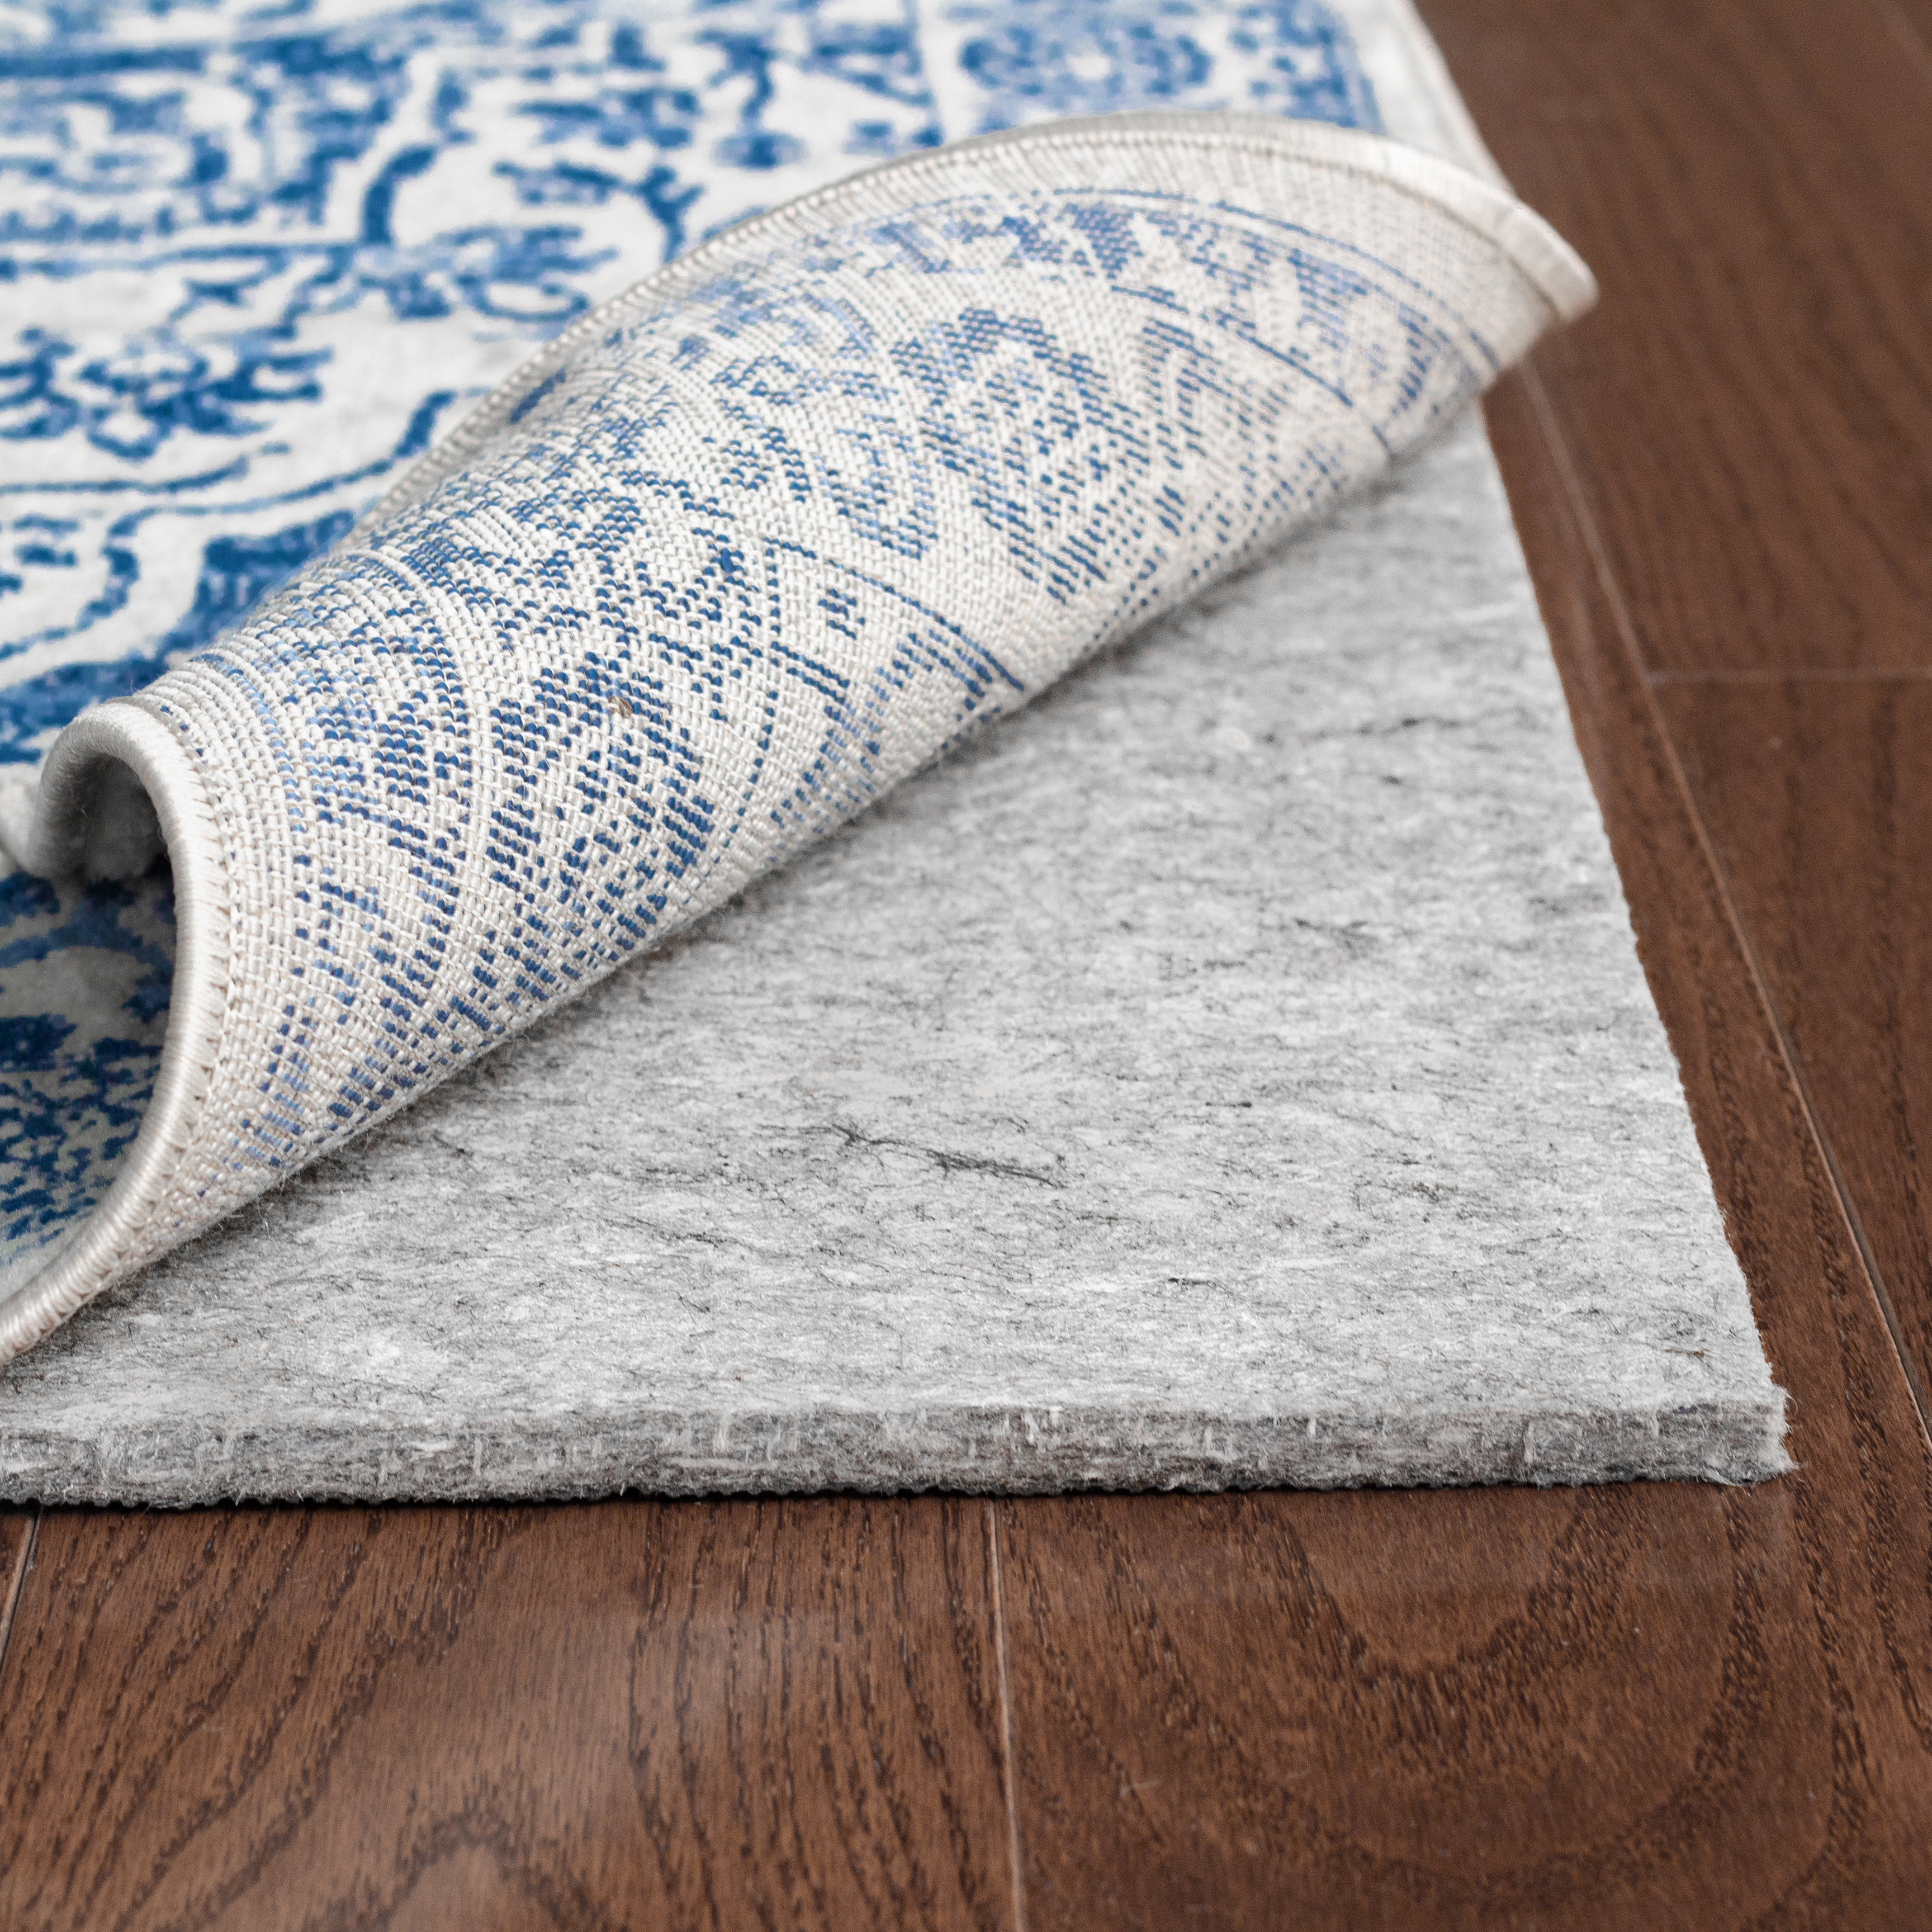 How to choose the right rug pad for your area rugs - RugPadUSA